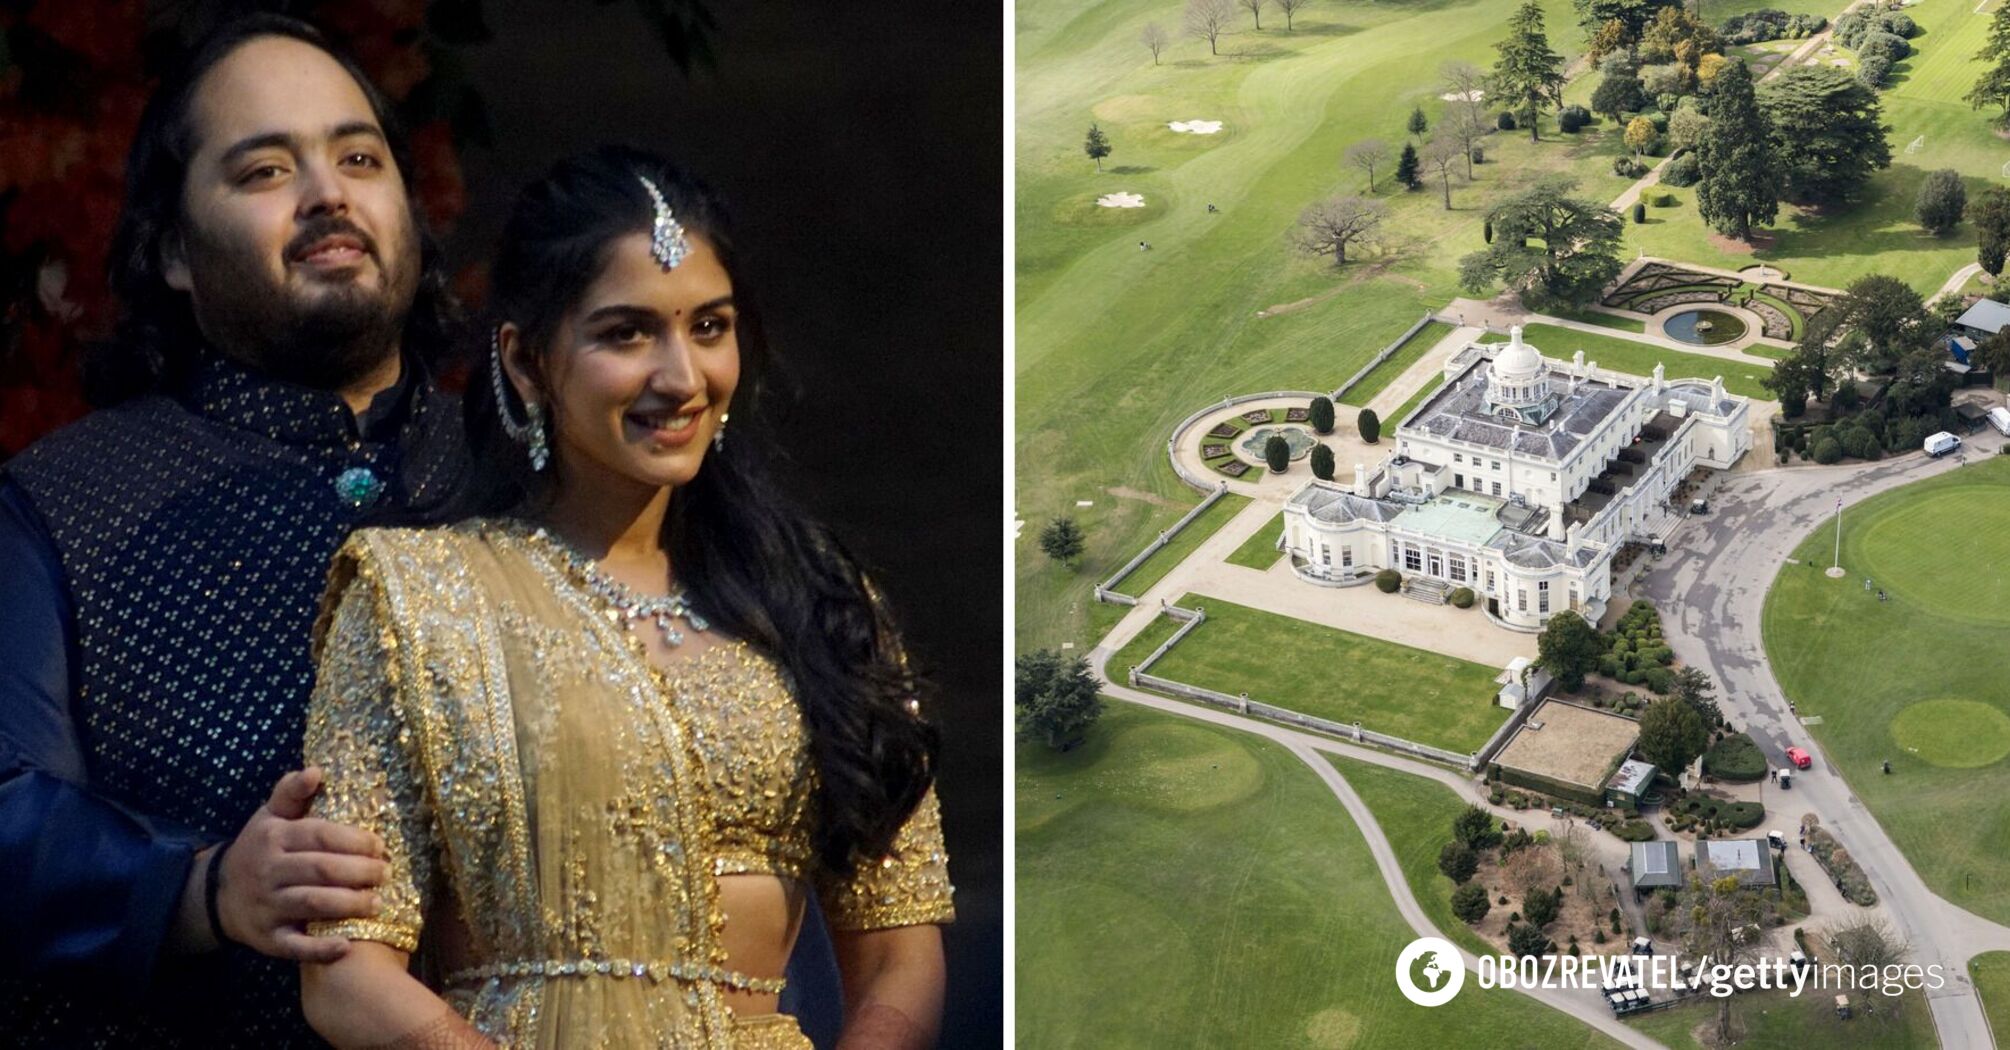 'The Wedding of the Year' continues: India's richest couple to throw a $73 million party with Prince Harry in the UK